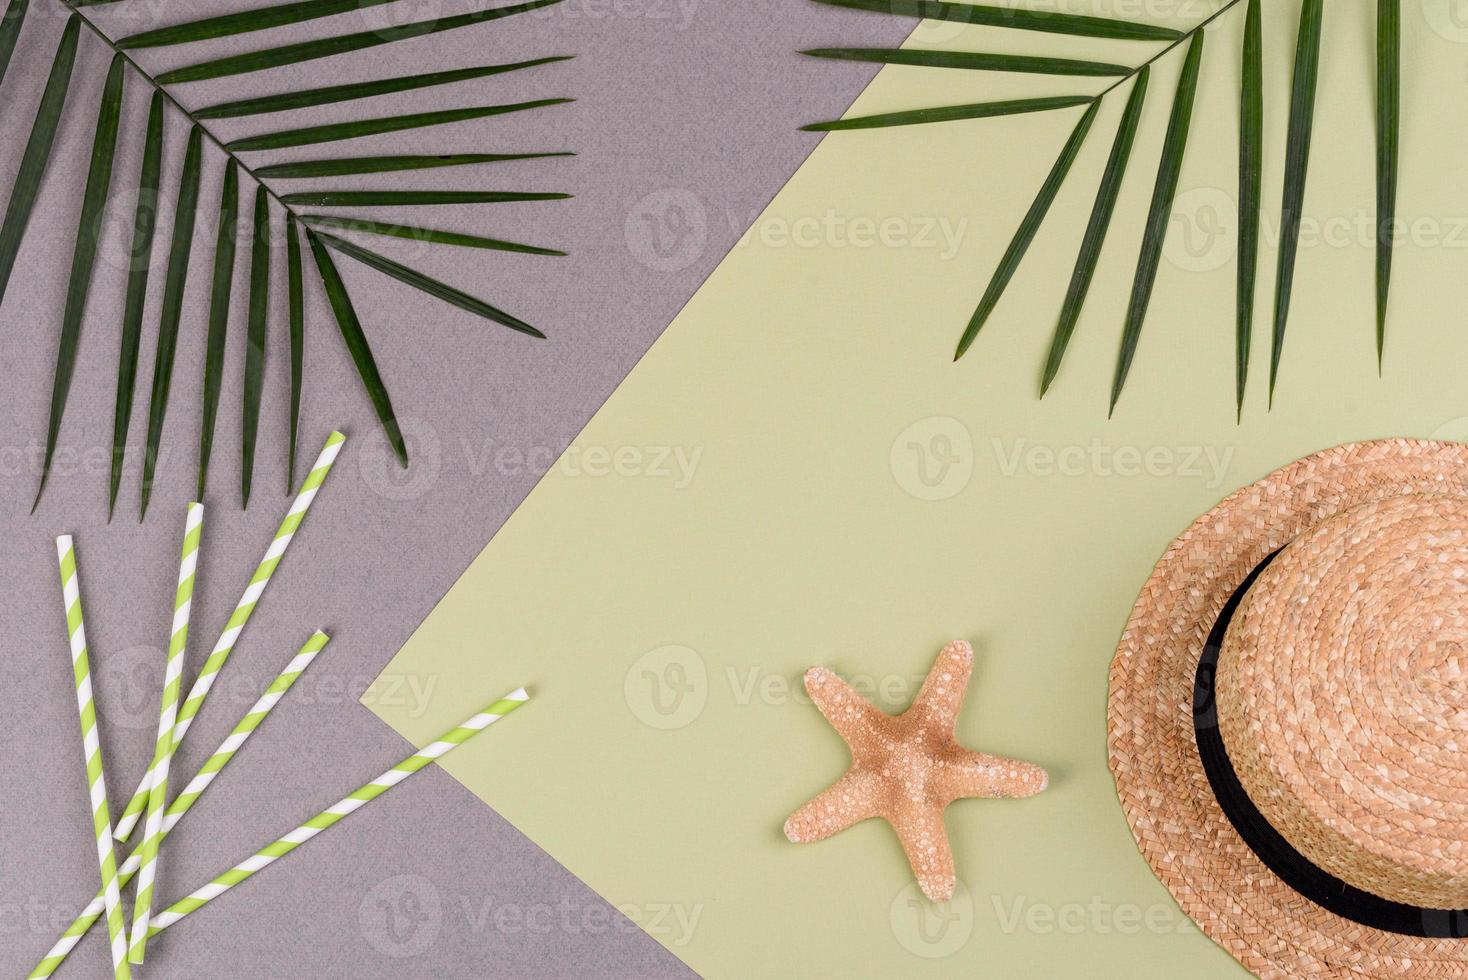 Beach accessories, glasses and hat with shells and sea stars on a colored background. Summer background photo